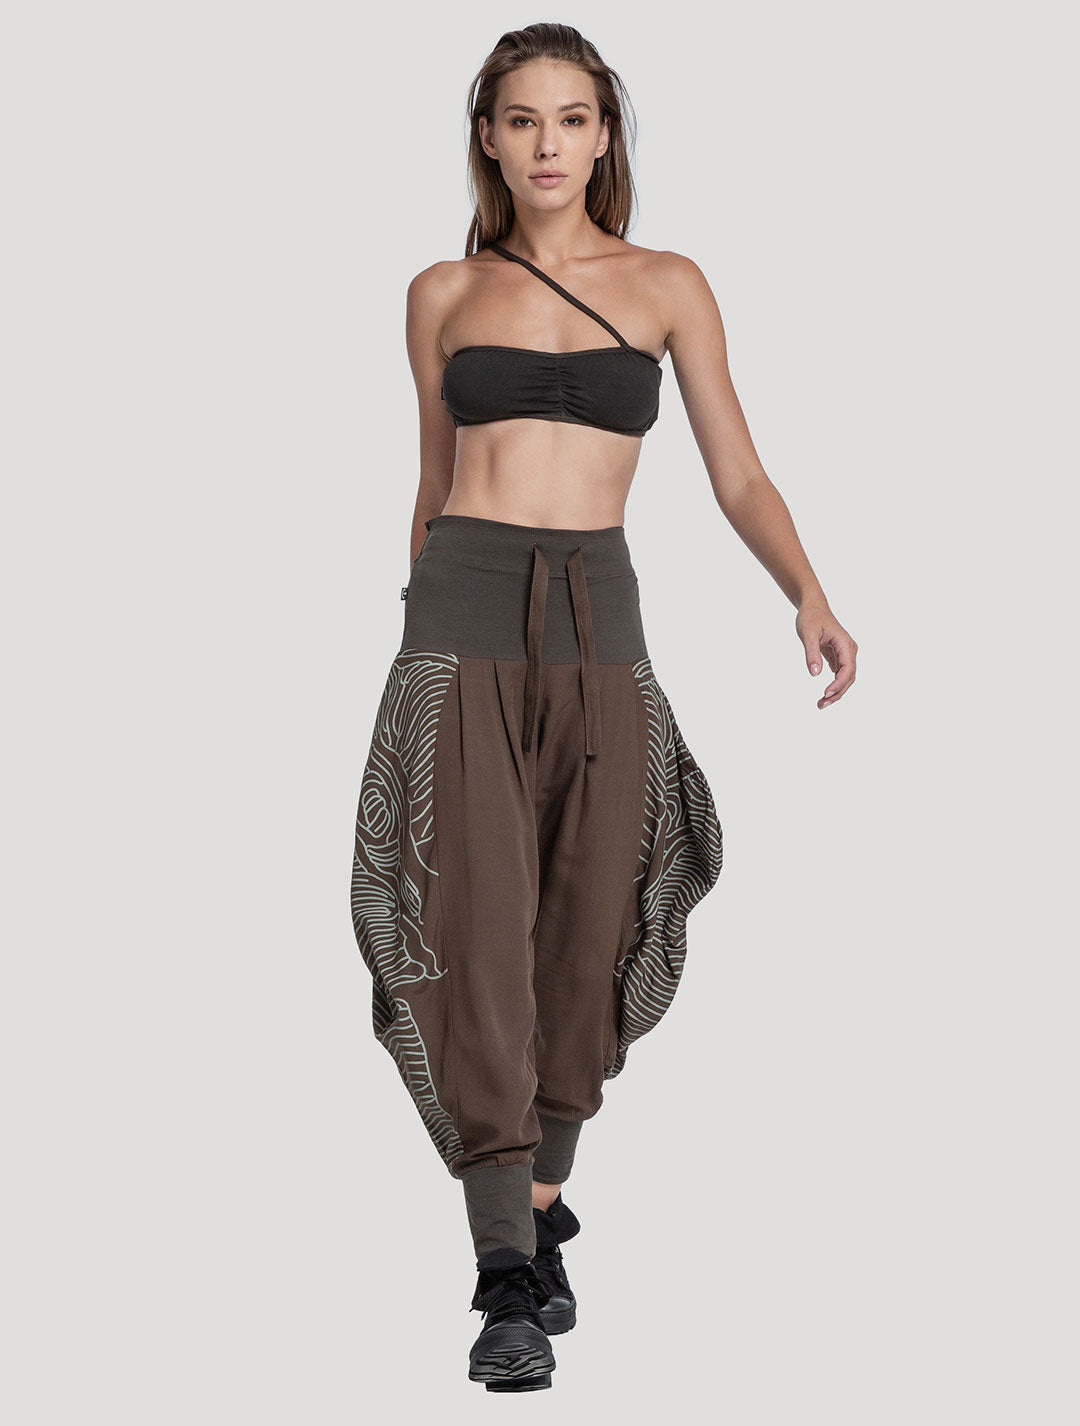 Womens High Waist Harem Pants Fashionable, Casual, Asymmetrical, Loose Fit  With Unilateral Pockets From Weeklyed, $19.47 | DHgate.Com